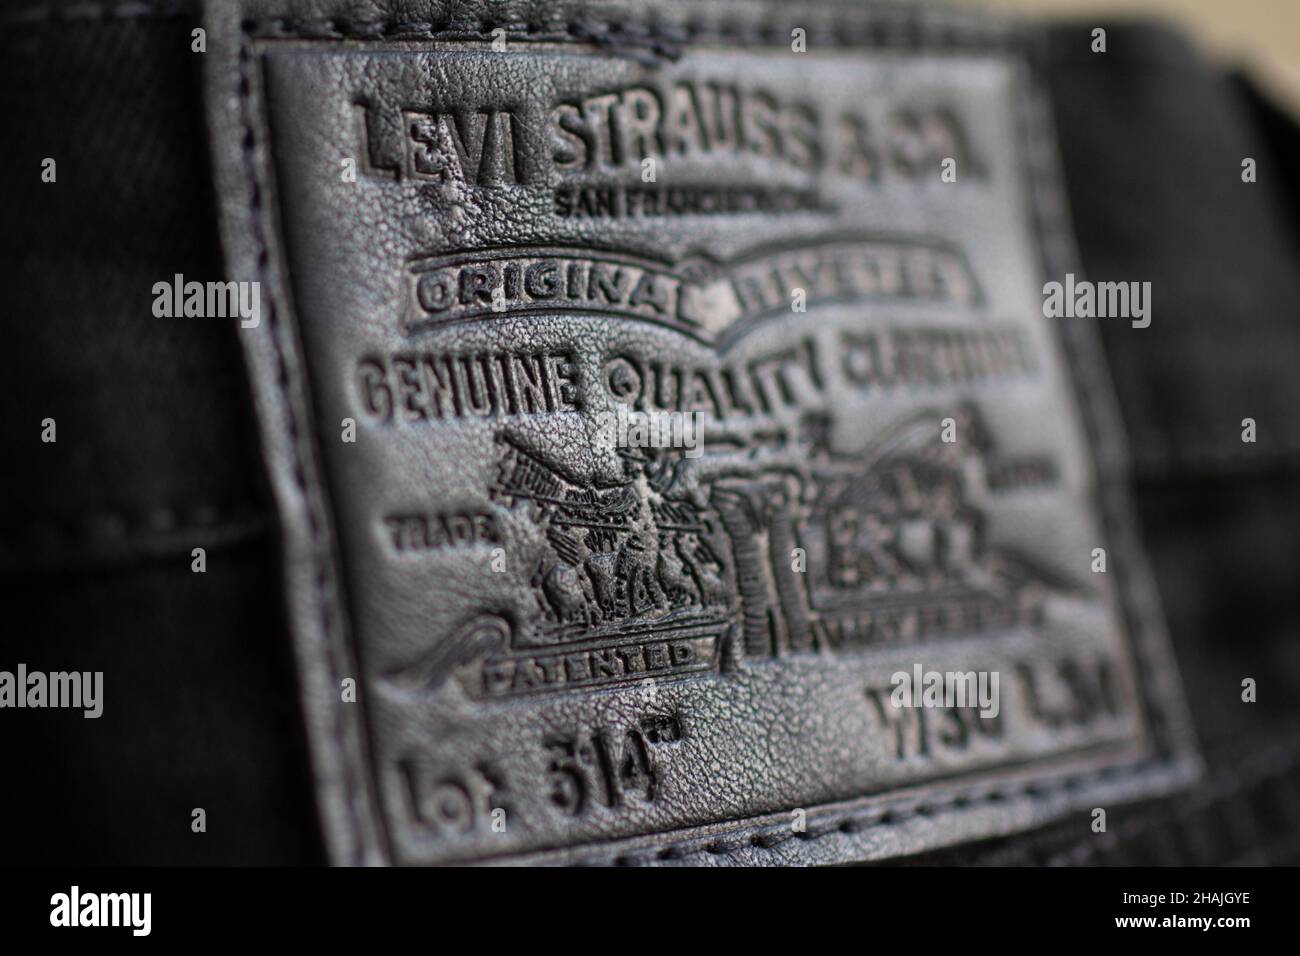 Black Levi Strauss jeans label, made by Levis Stock Photo